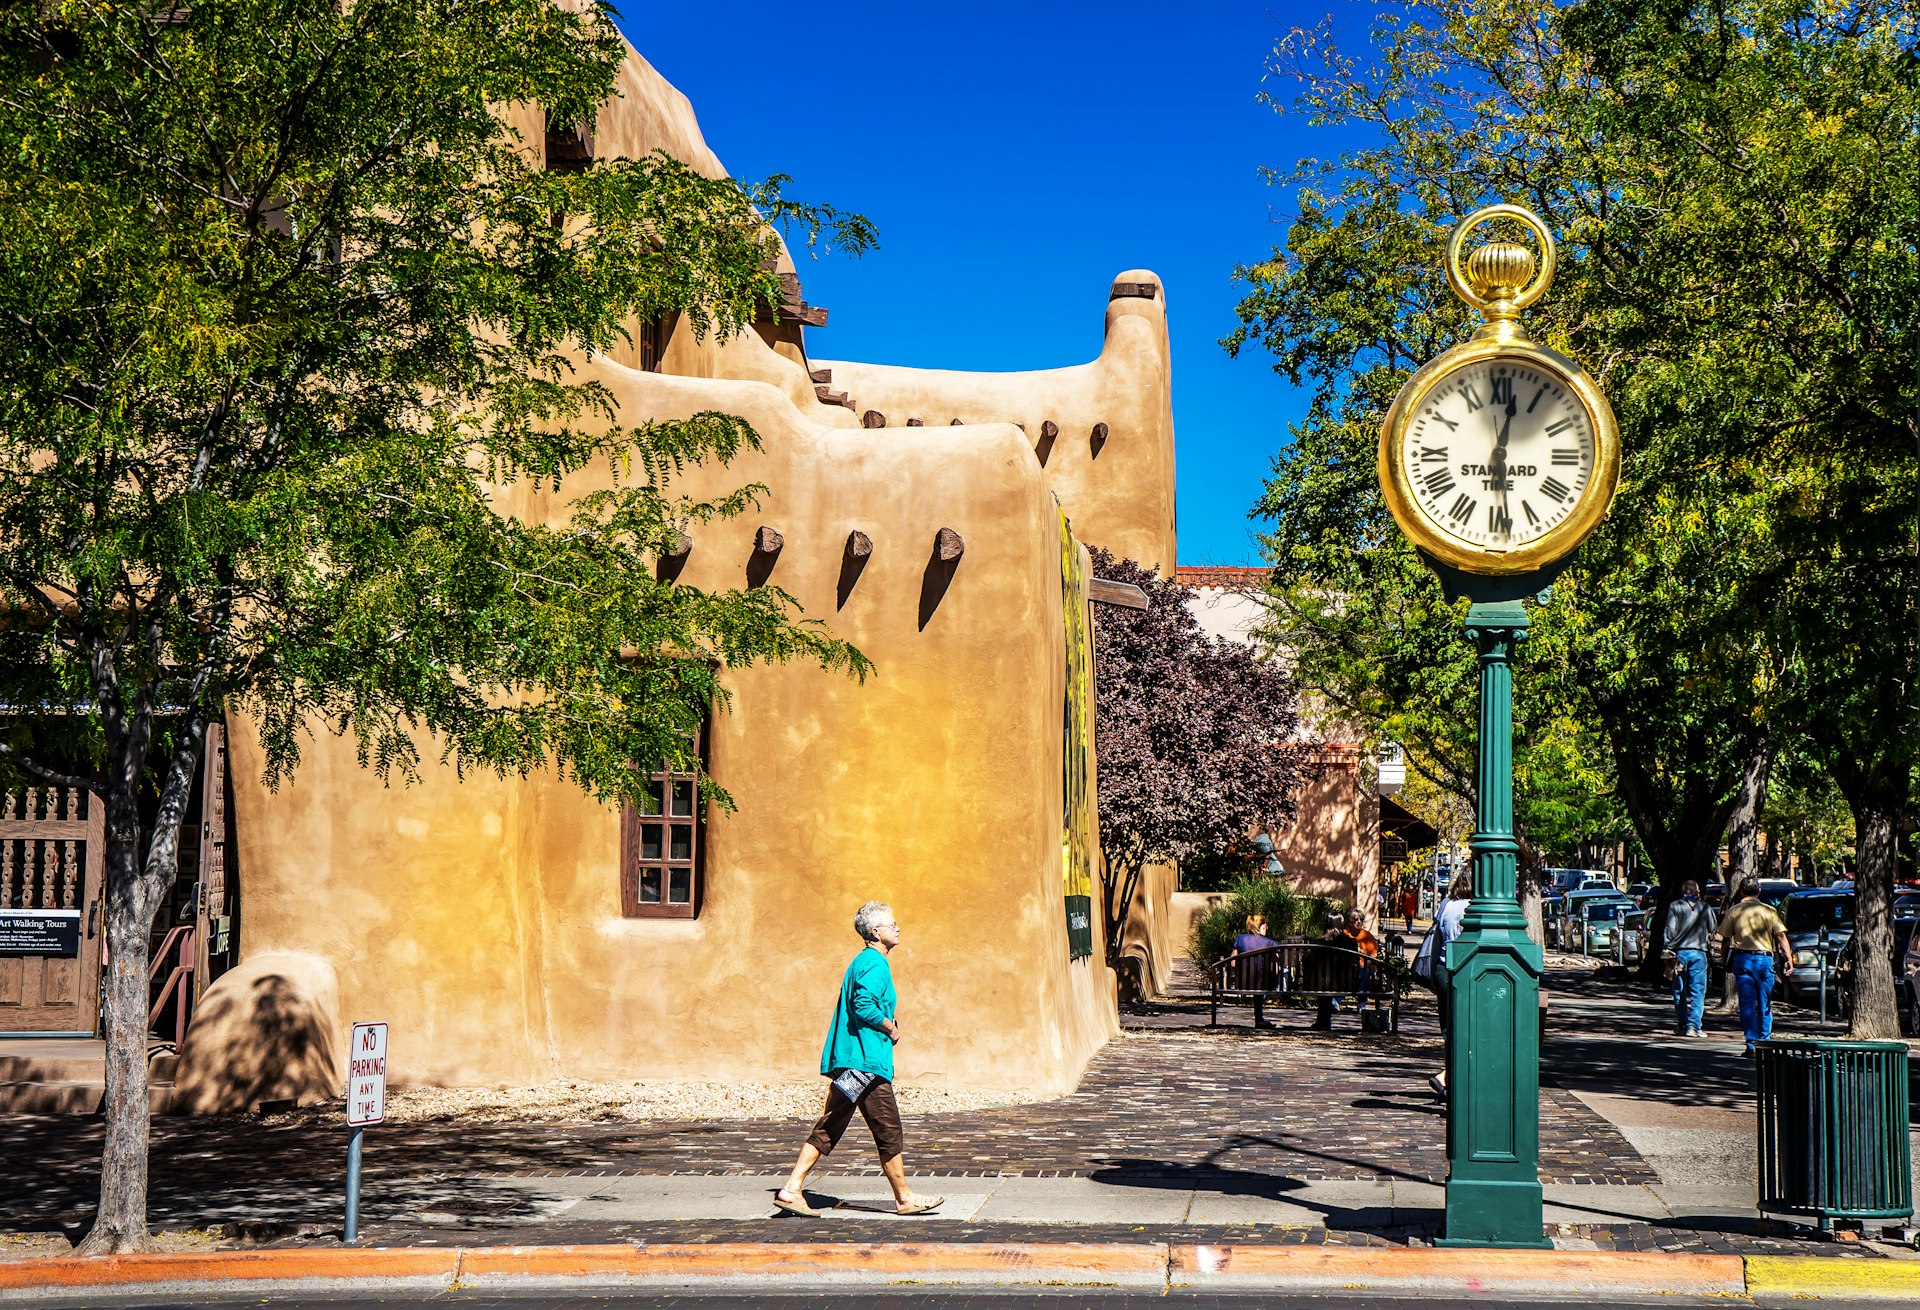 A woman walks along a road in Santa Fe, with one of the characteristic copper-hued buildings behind her.